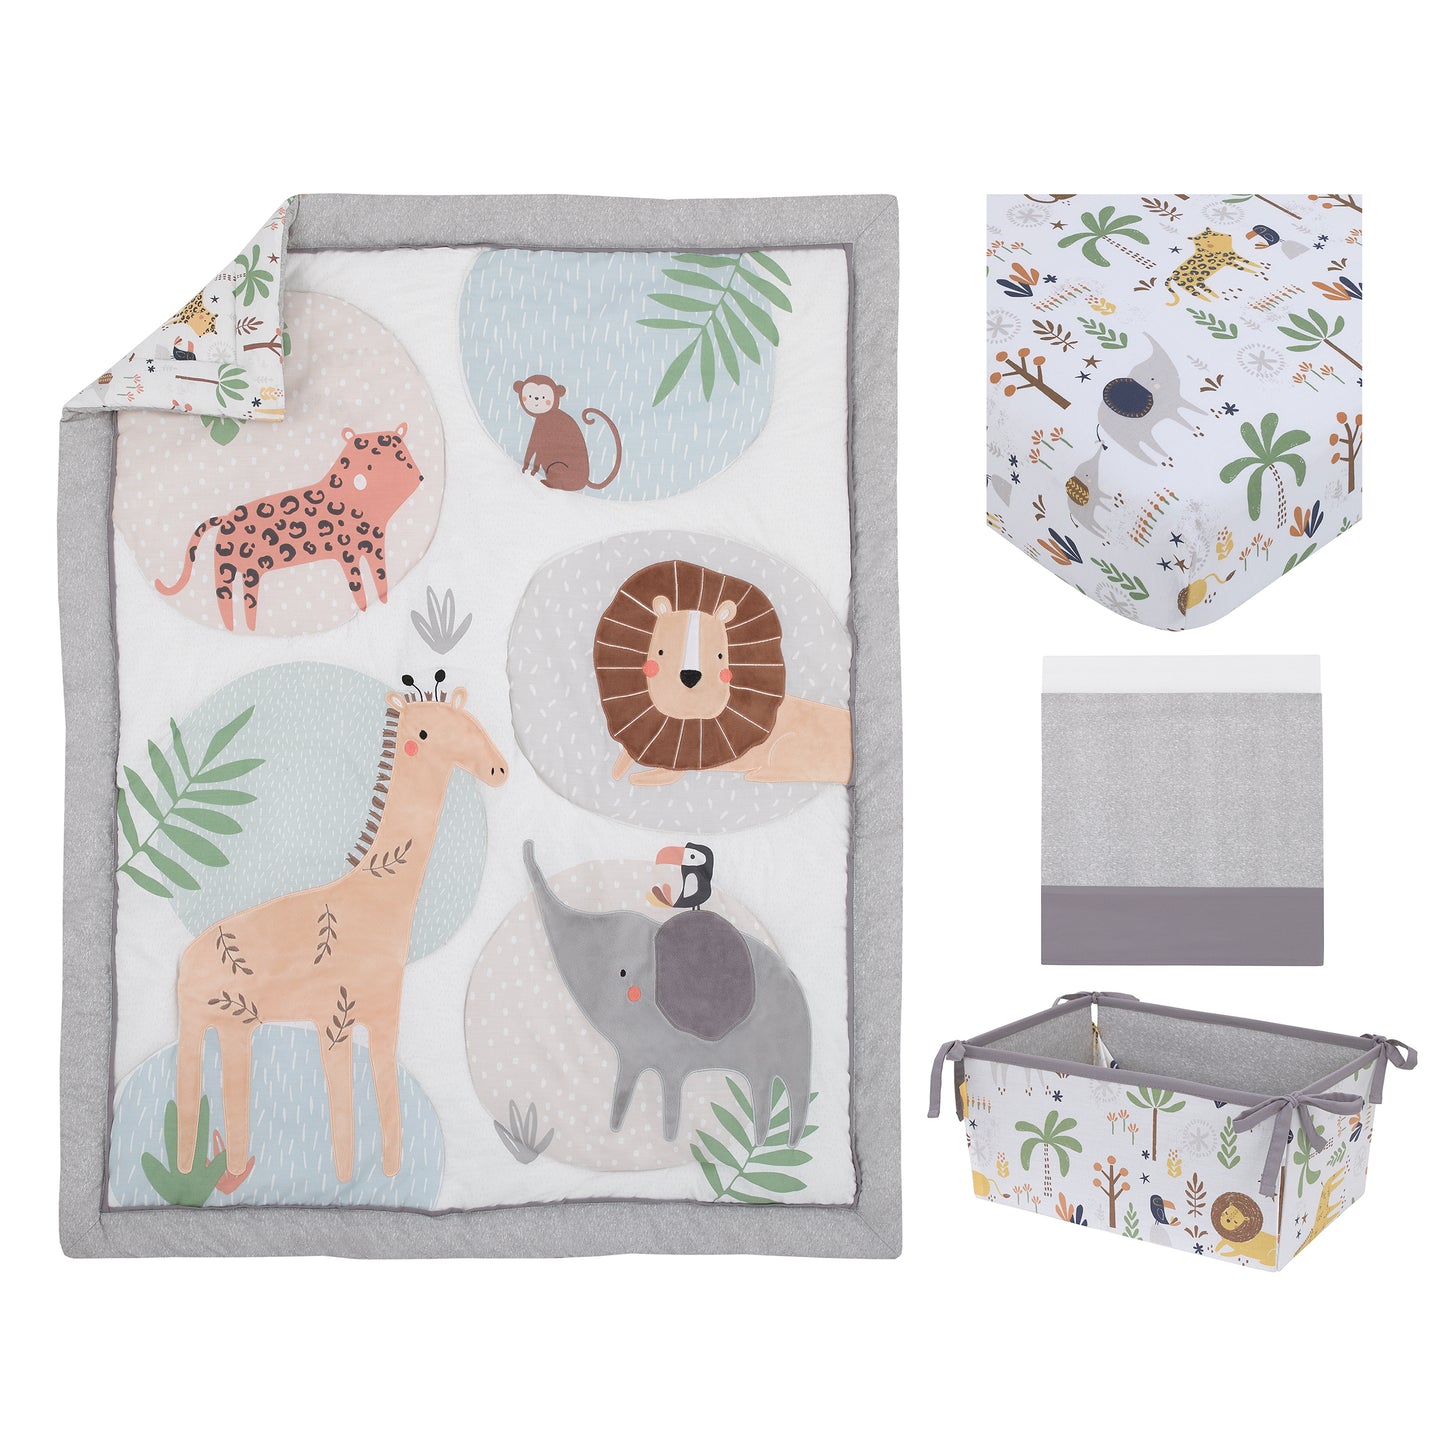 NoJo Jungle Trails Grey, Green and Gold Elephant, Lion and Giraffe 4 Piece Nursery Crib Bedding Set - Comforter, 100% Cotton Fitted Crib Sheet, Crib Skirt, and Storage